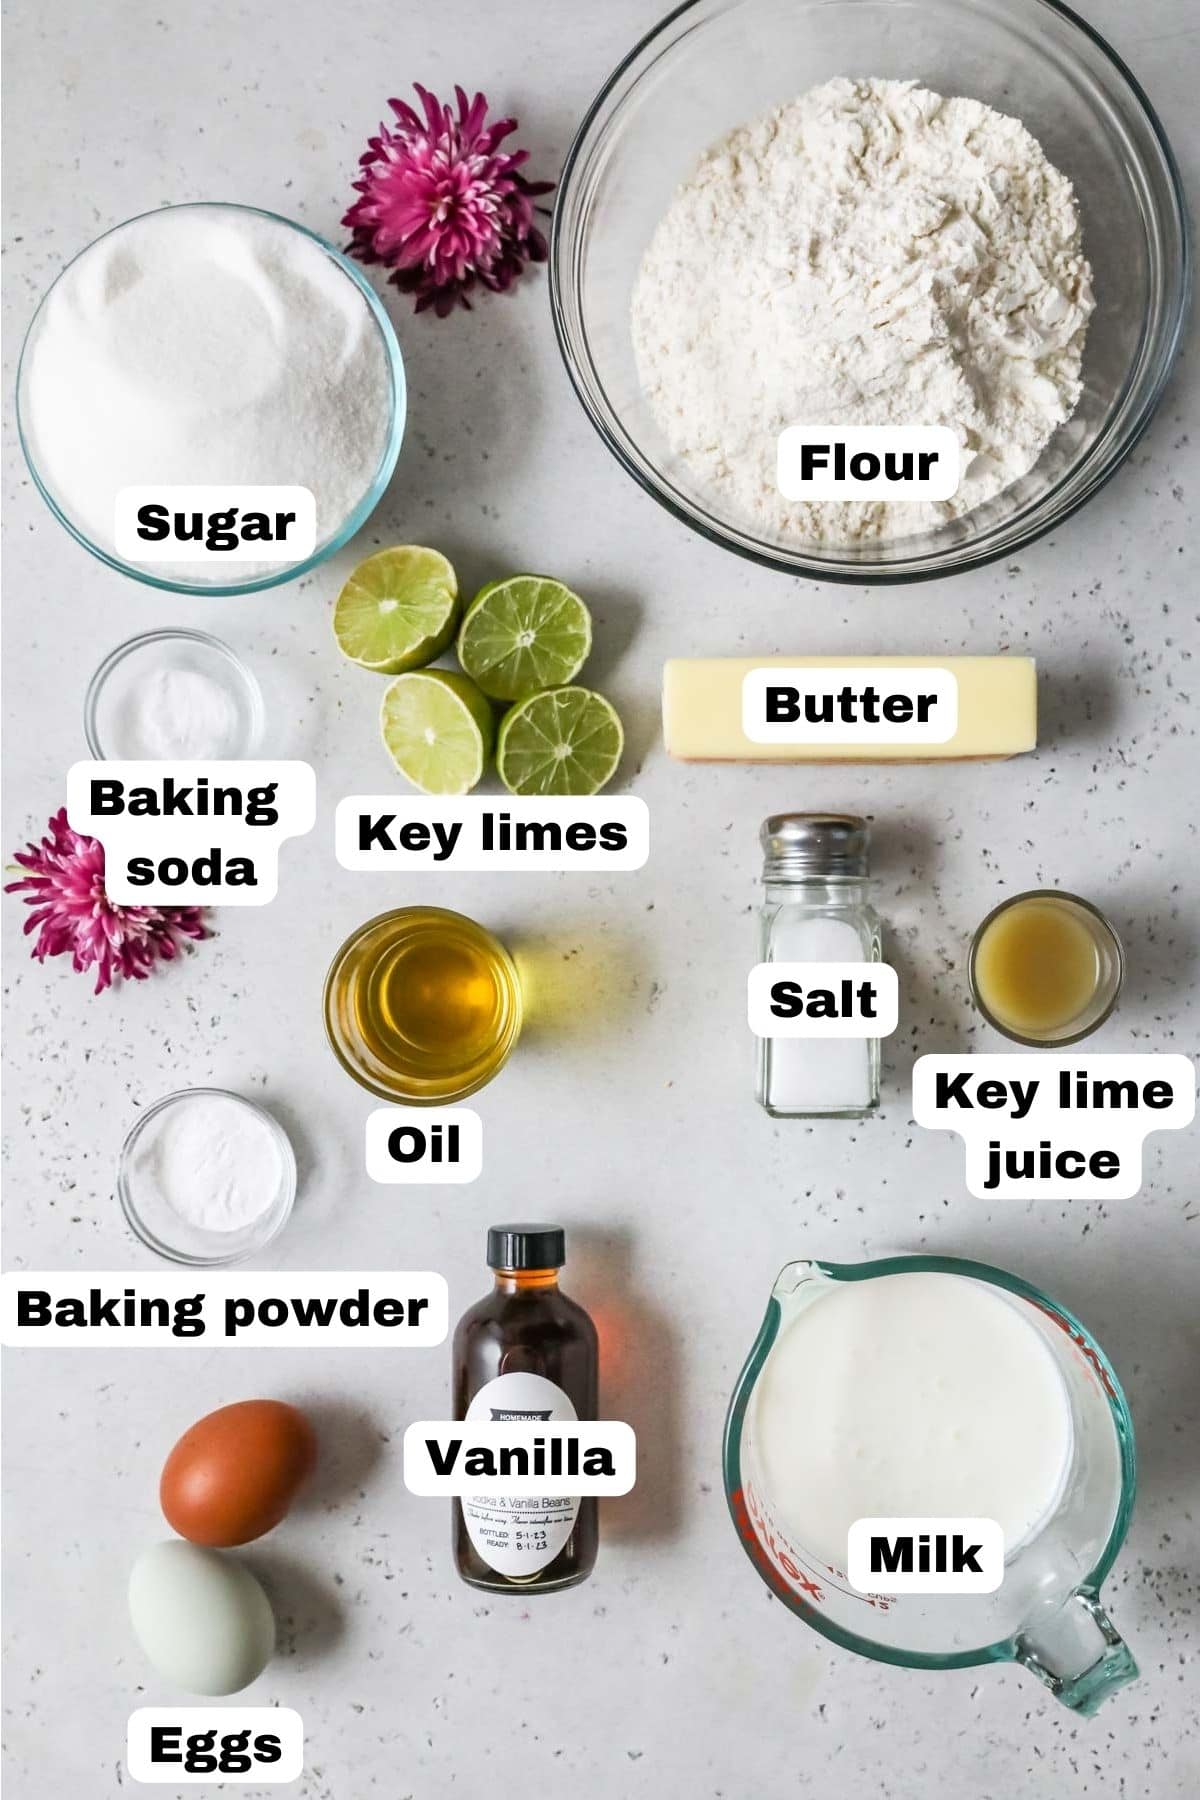 Overhead view of labelled cake ingredients including key limes, buttermilk, eggs, and more.